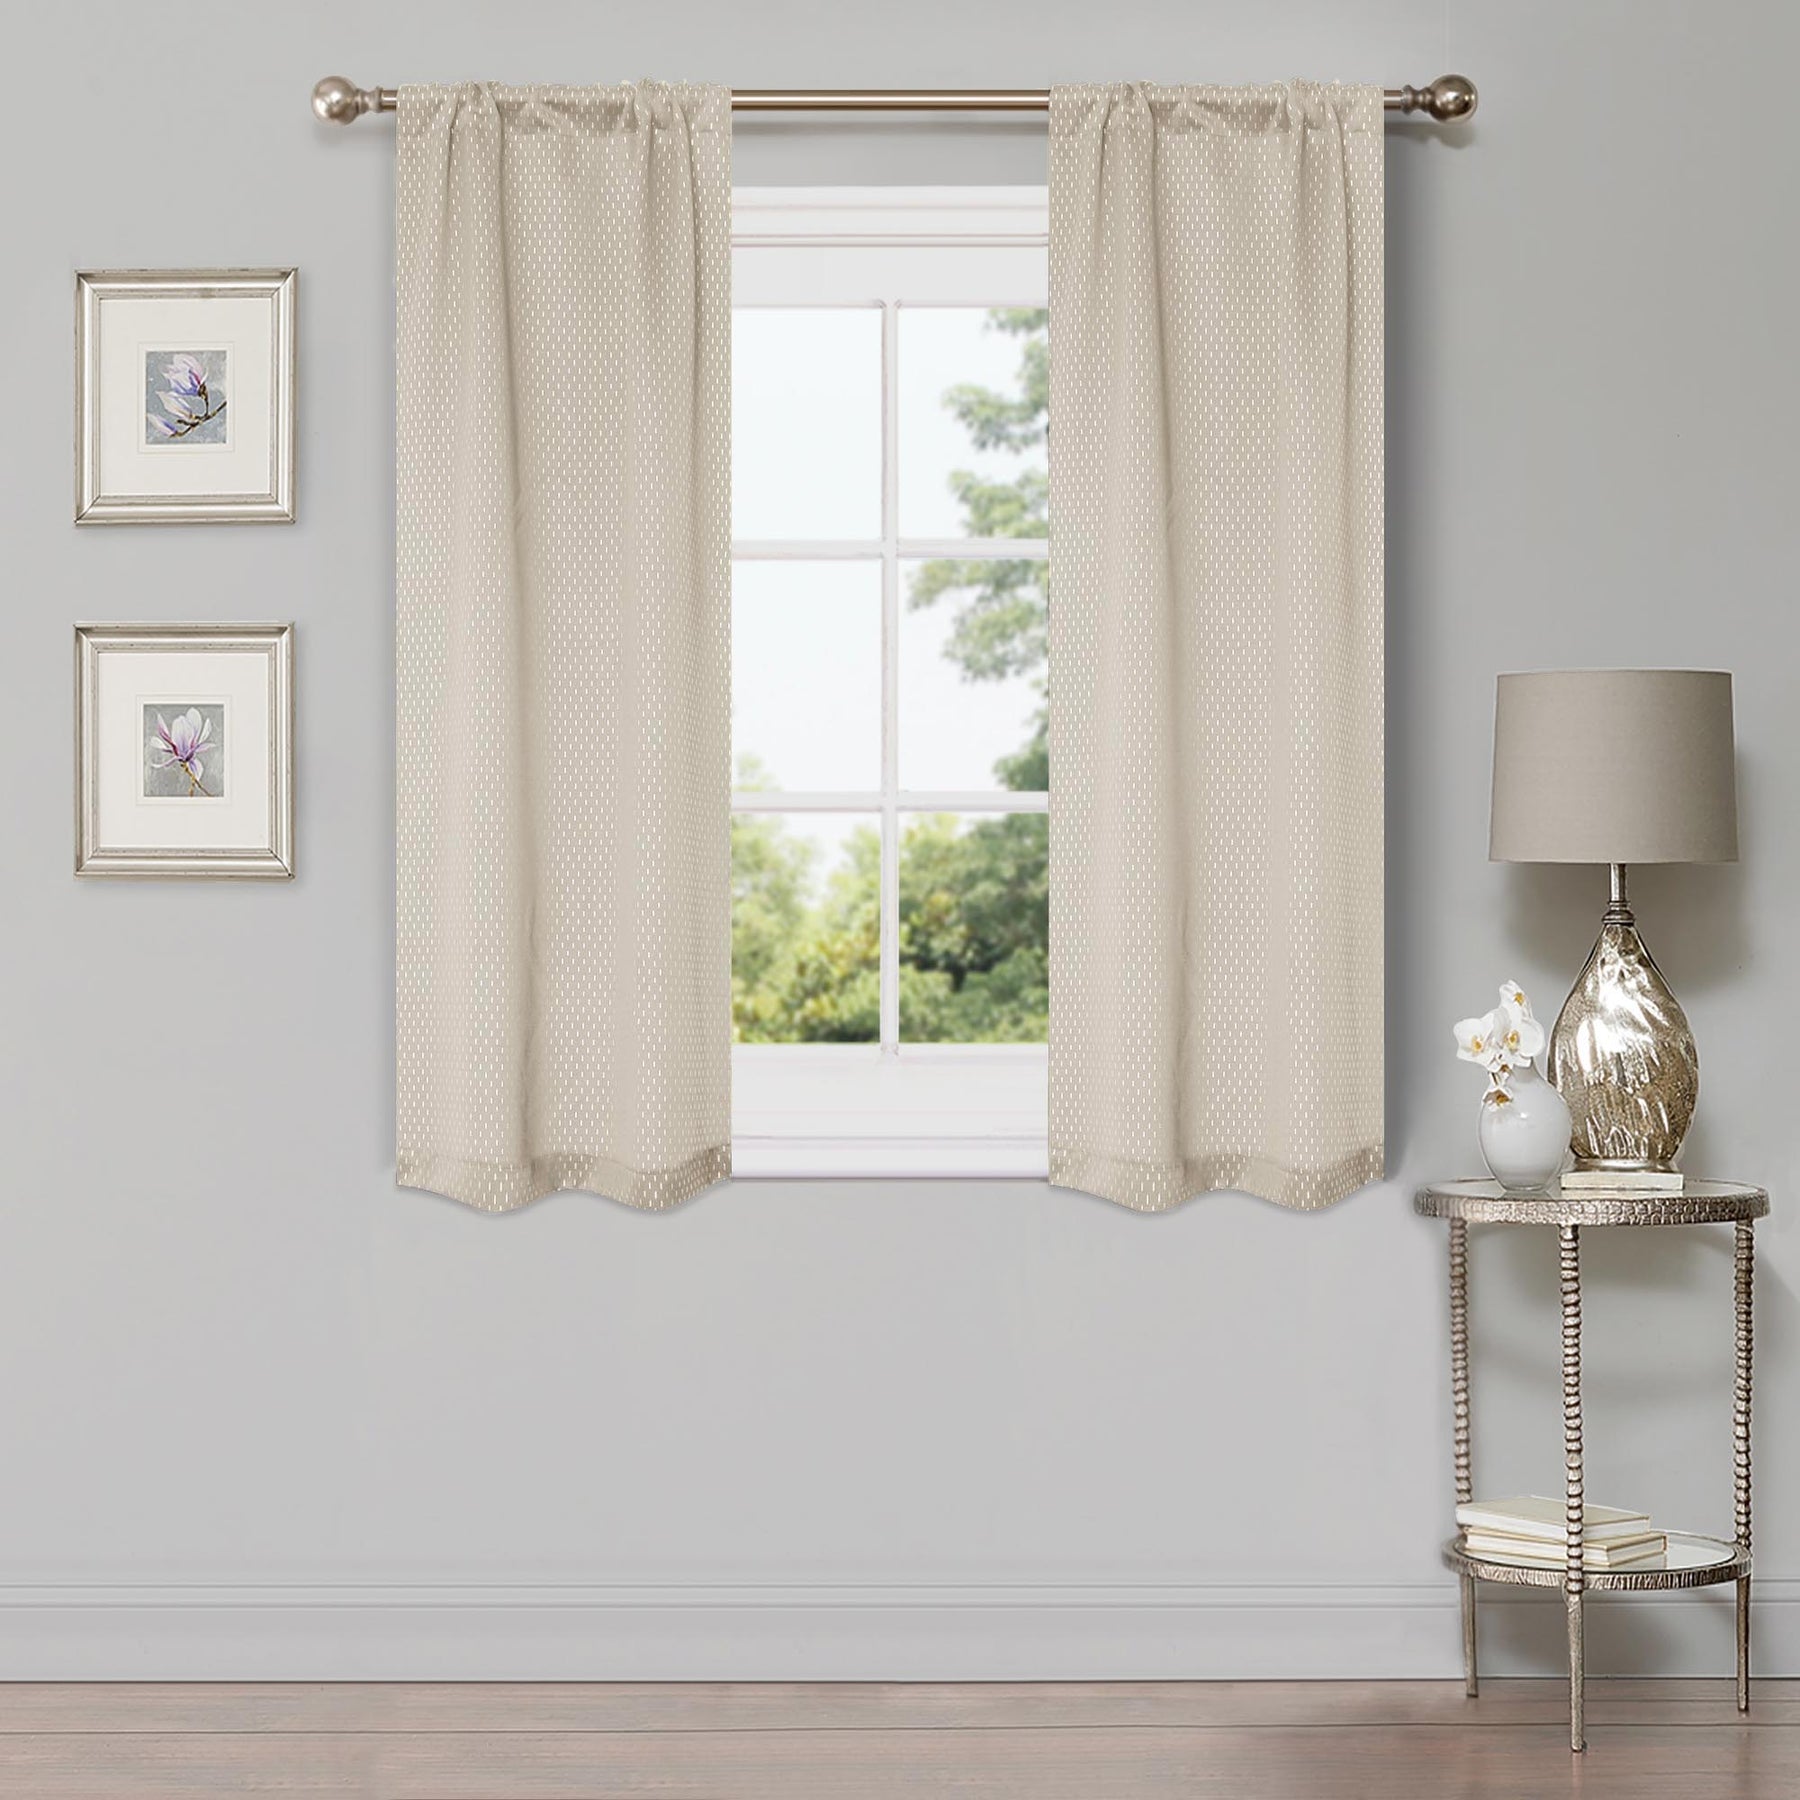 Blackout Solid Shimmer Grommet Curtain Panel - Ivory